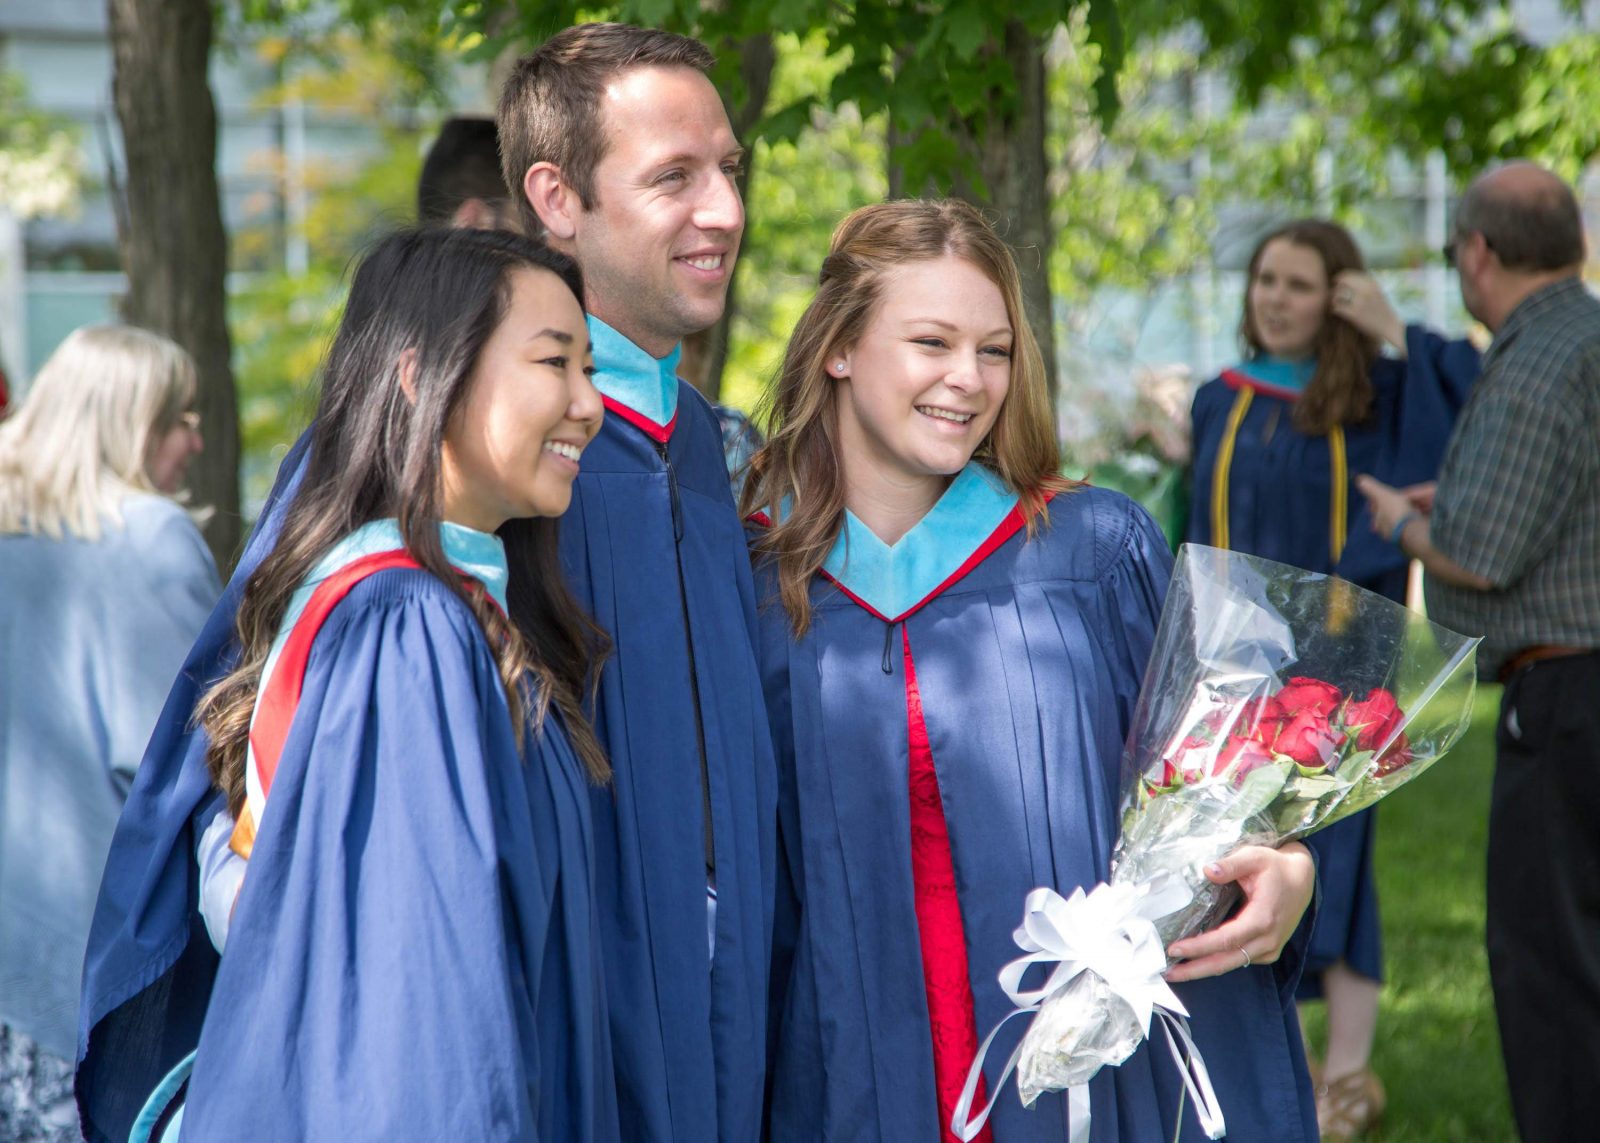 Three graduates stand together posing for a photo outdoors.